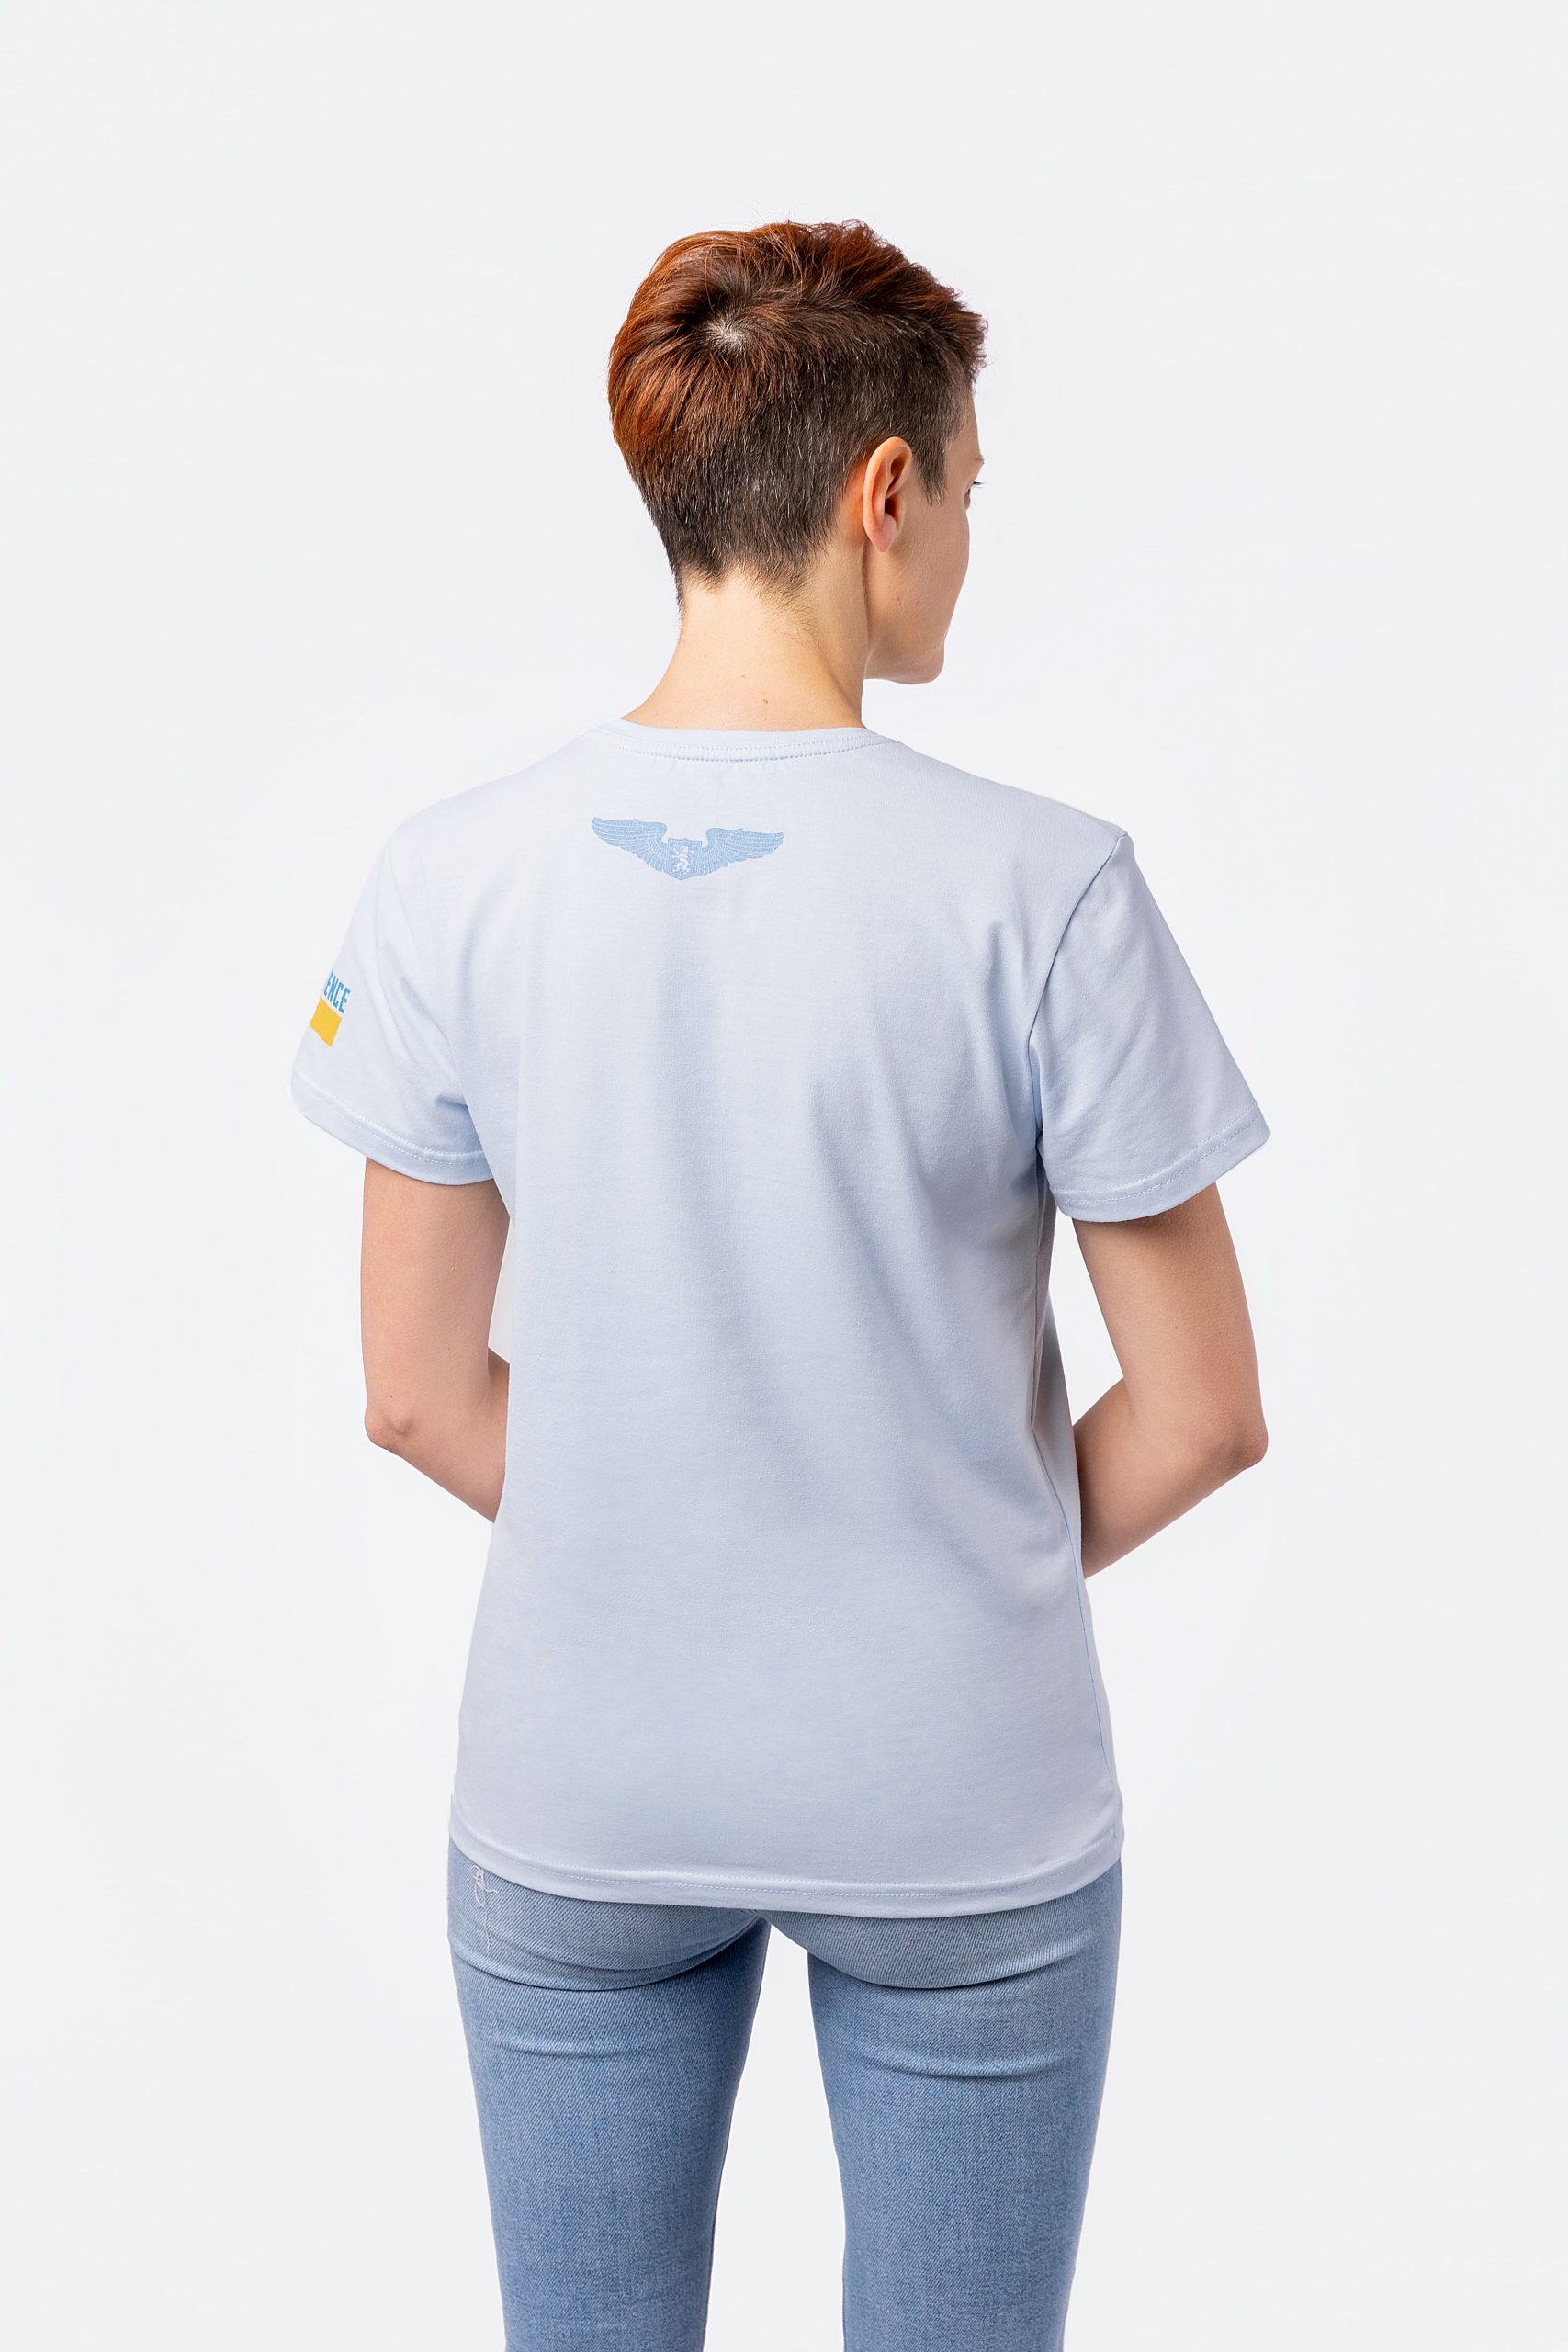 Women's T-Shirt We Are From Ukraine.а. Color light blue. 1.